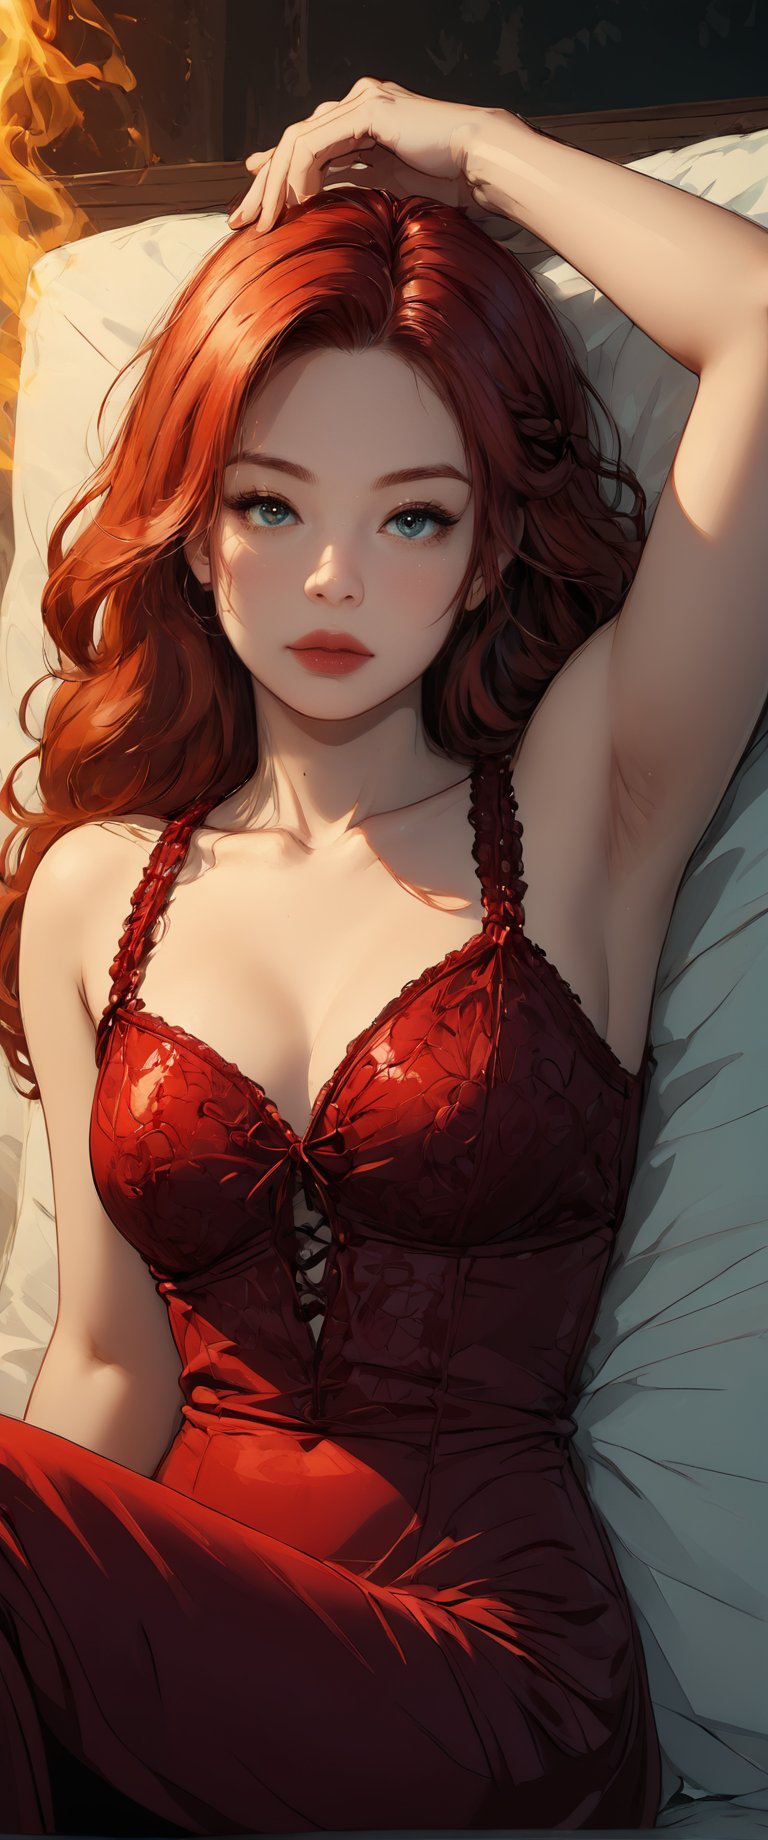 A crimson-haired Red Sonja lounges languidly on a velvet-draped divan, her curves accentuated by the soft lighting. She reclines on one elbow, her gaze cast downward as if lost in thought, her full lips parted slightly in a sensual pose. The rich red fabric of her dress seems to glow with an inner light, matching the fiery hue of her hair.